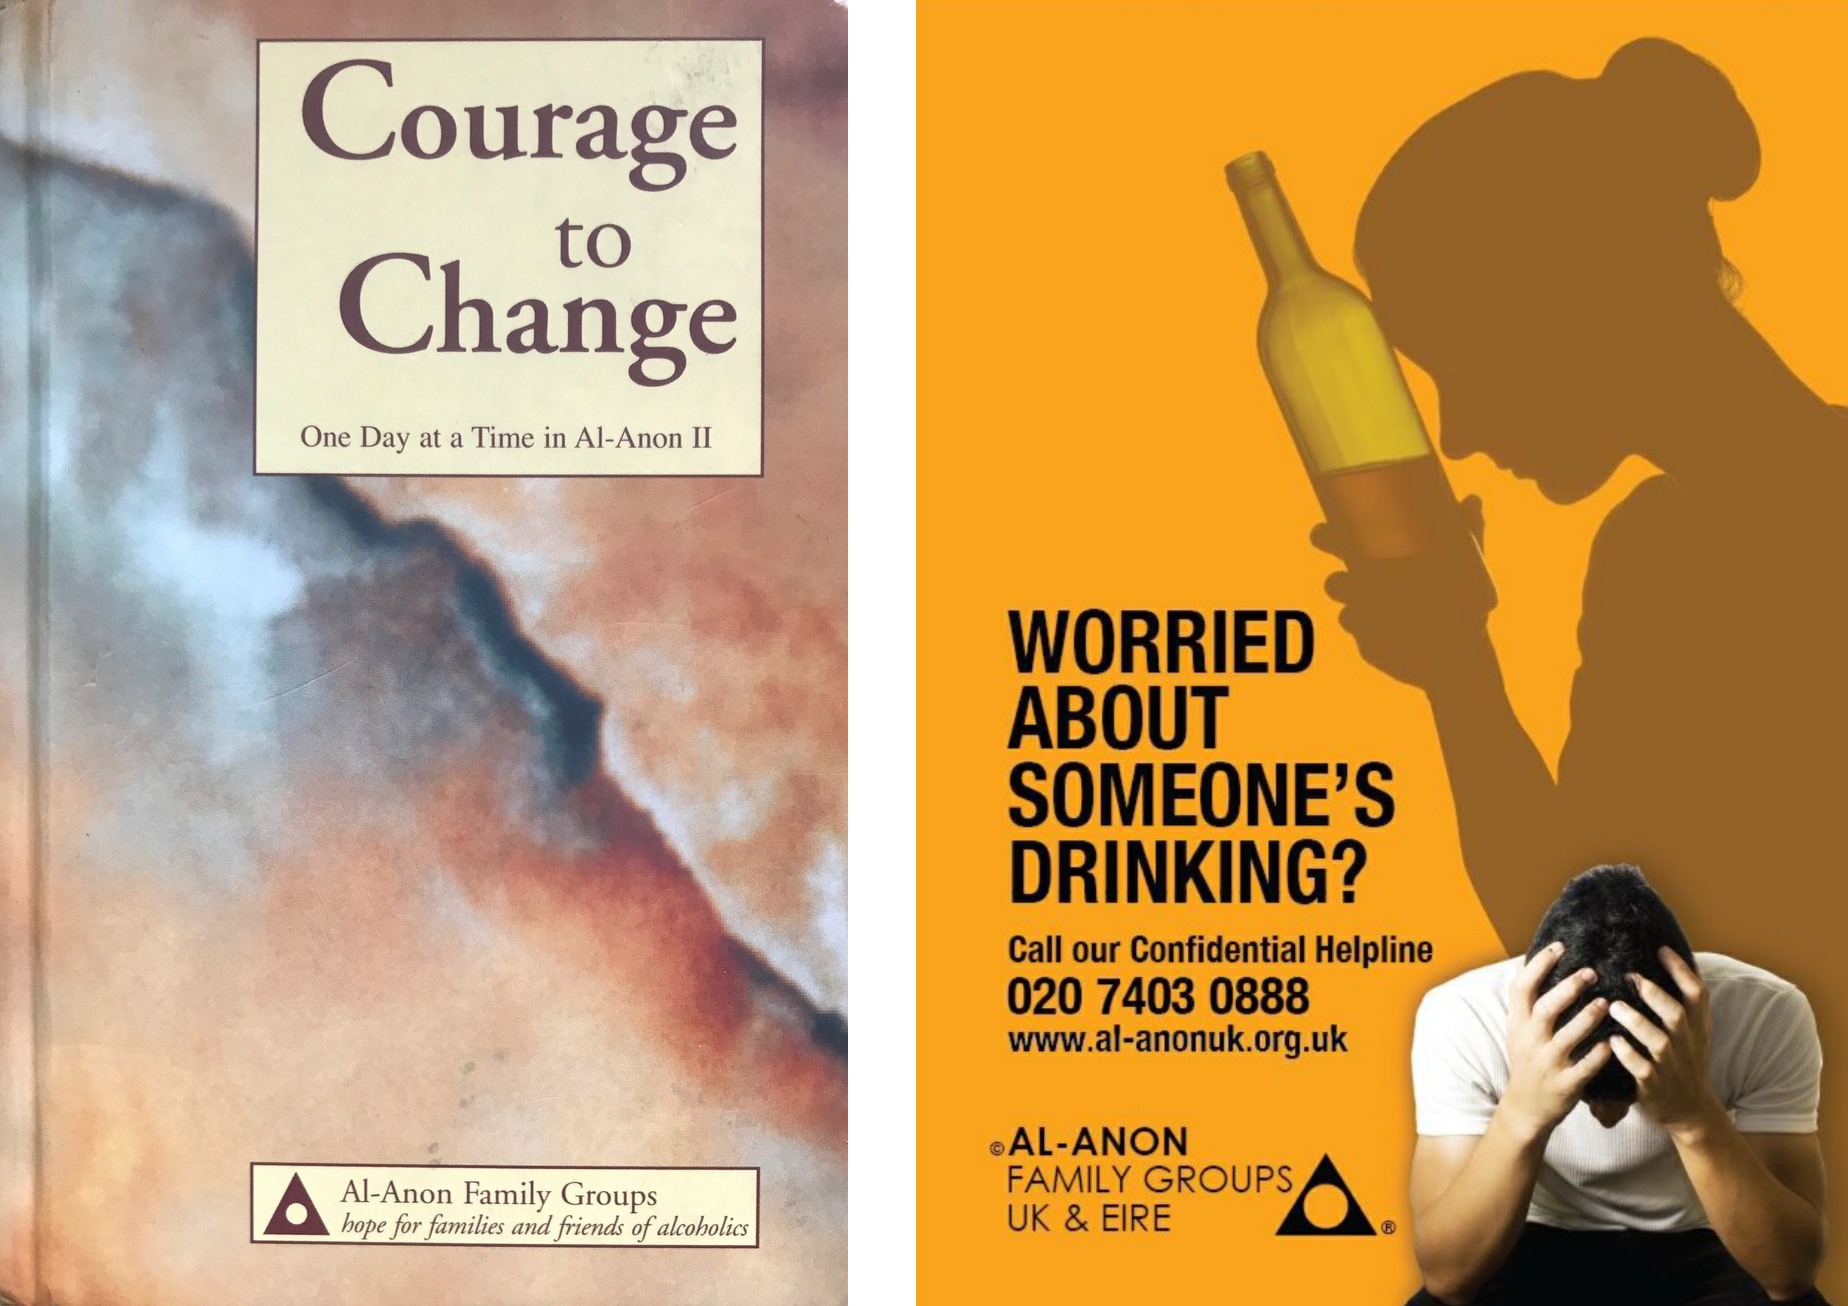 Great Success: Courage to Change book (left) and Al-Anon poster.